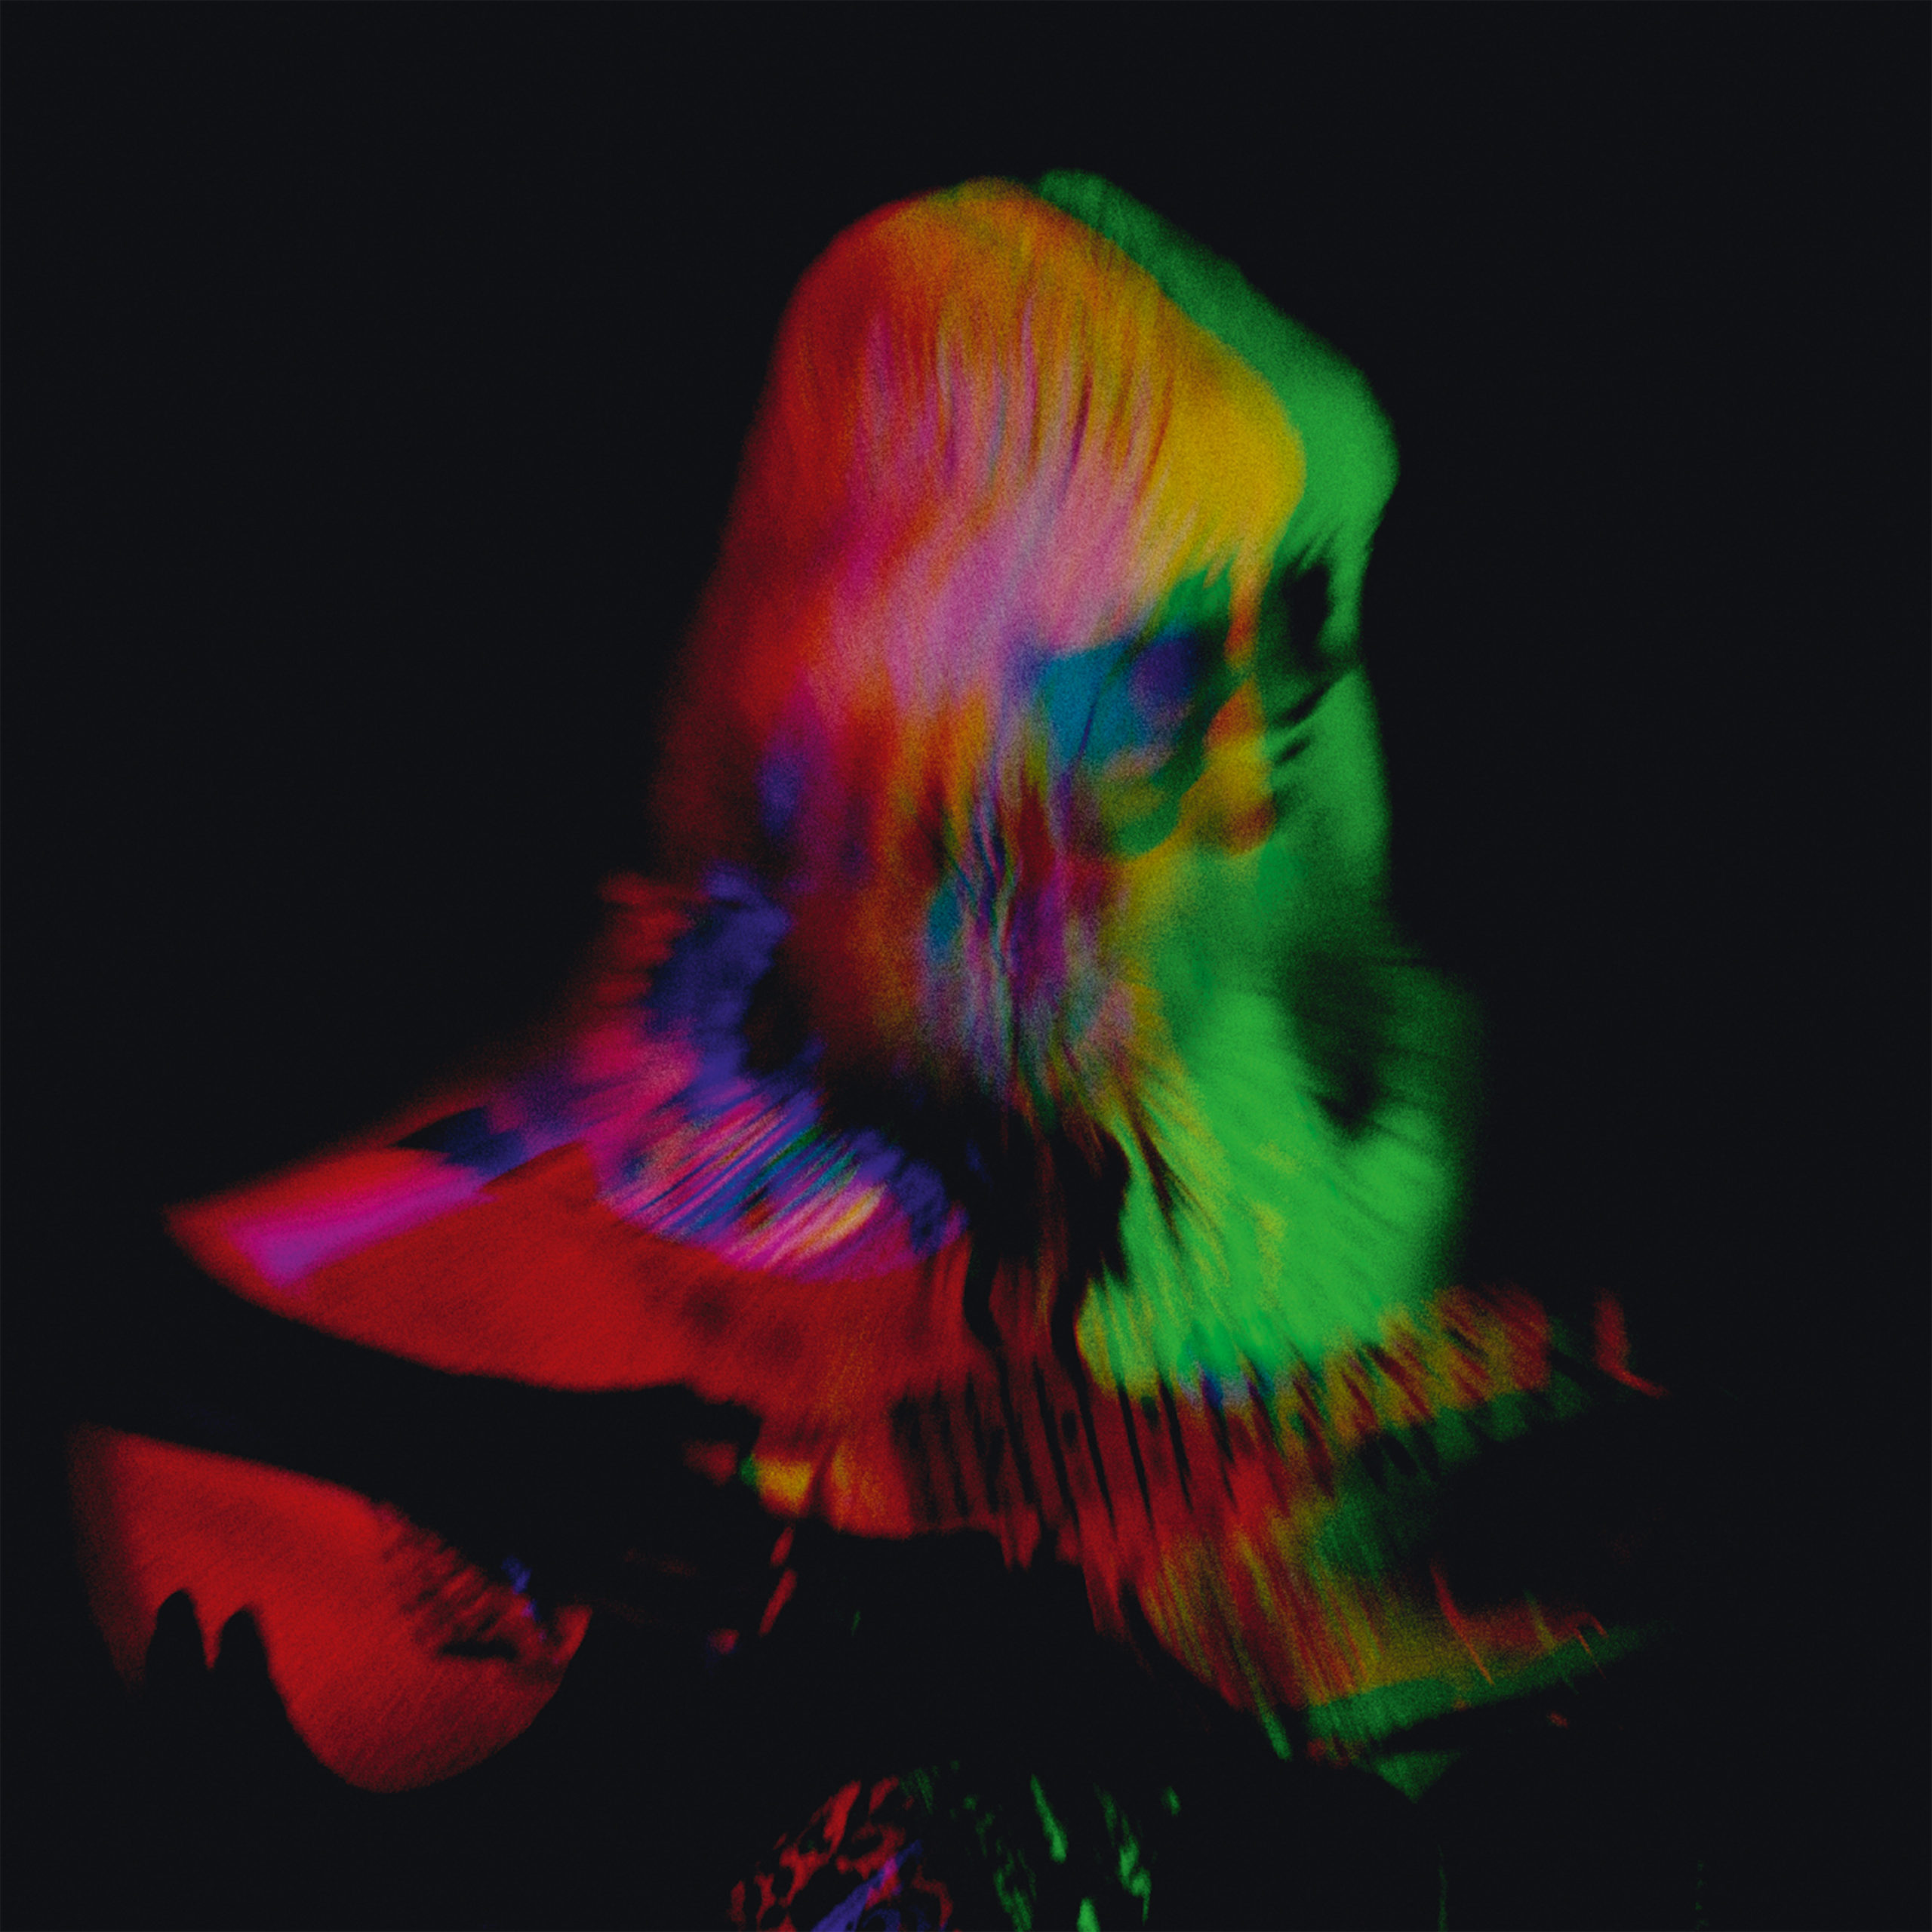 Trippy image of Melody Prochet playing guitar